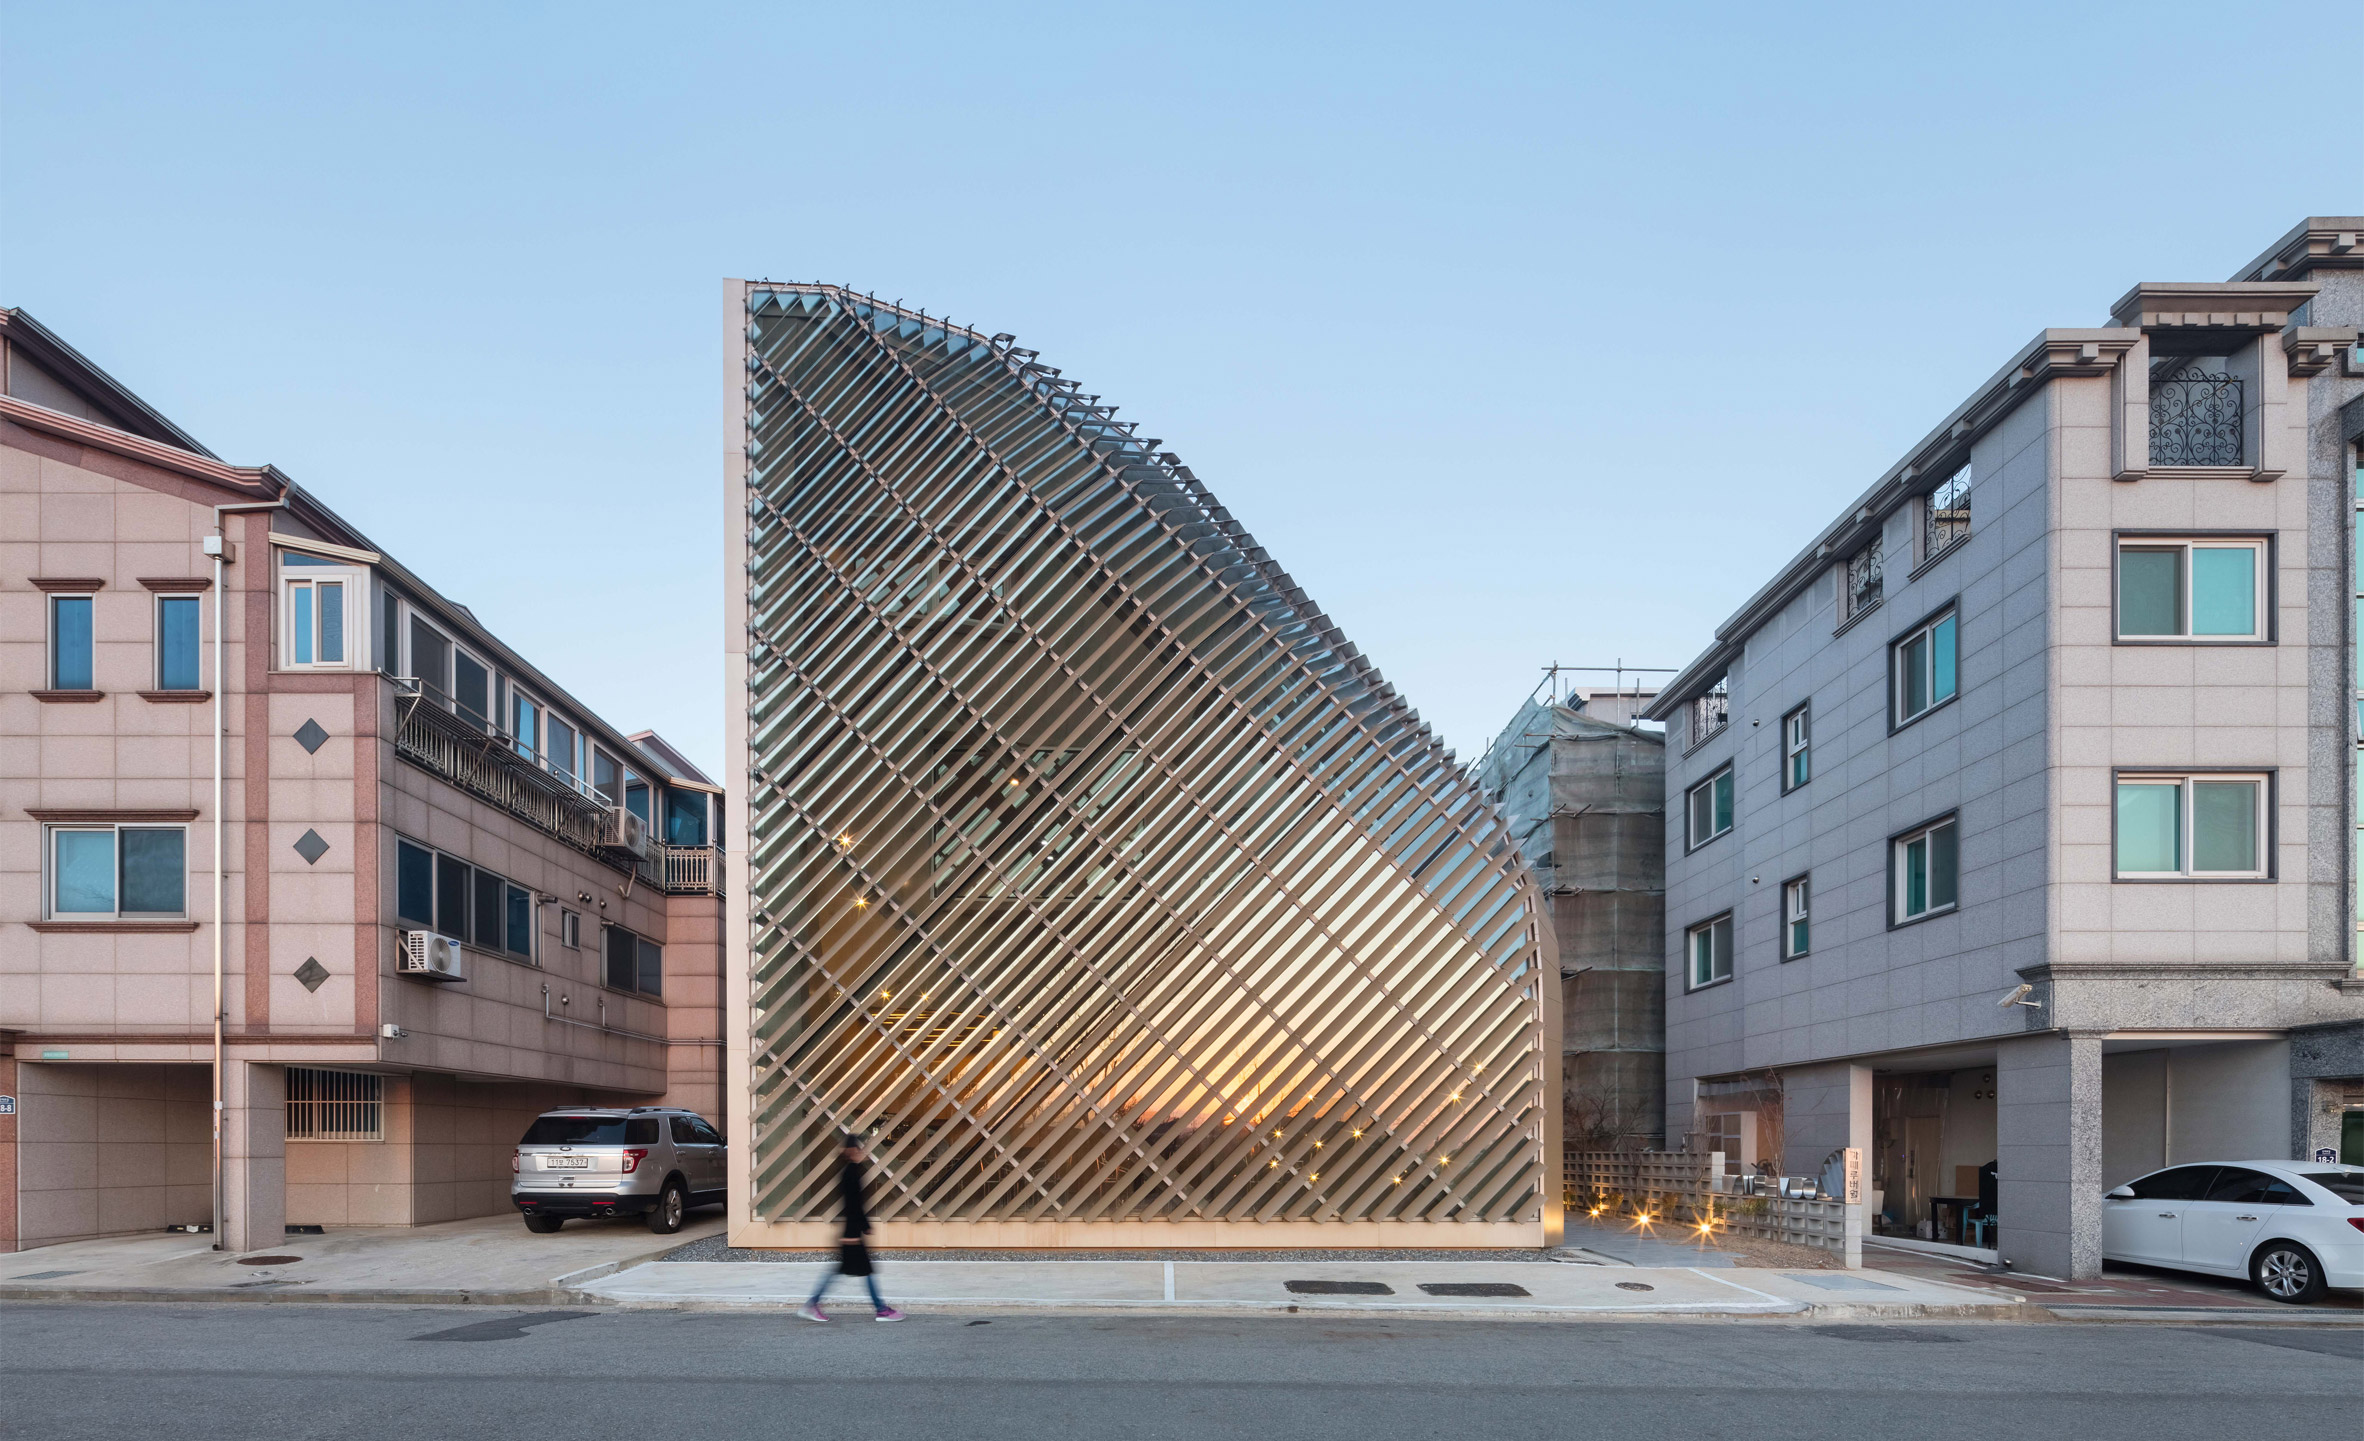 Aluminium louvres cover curving walls of house and cafe in South ... - Dezeen